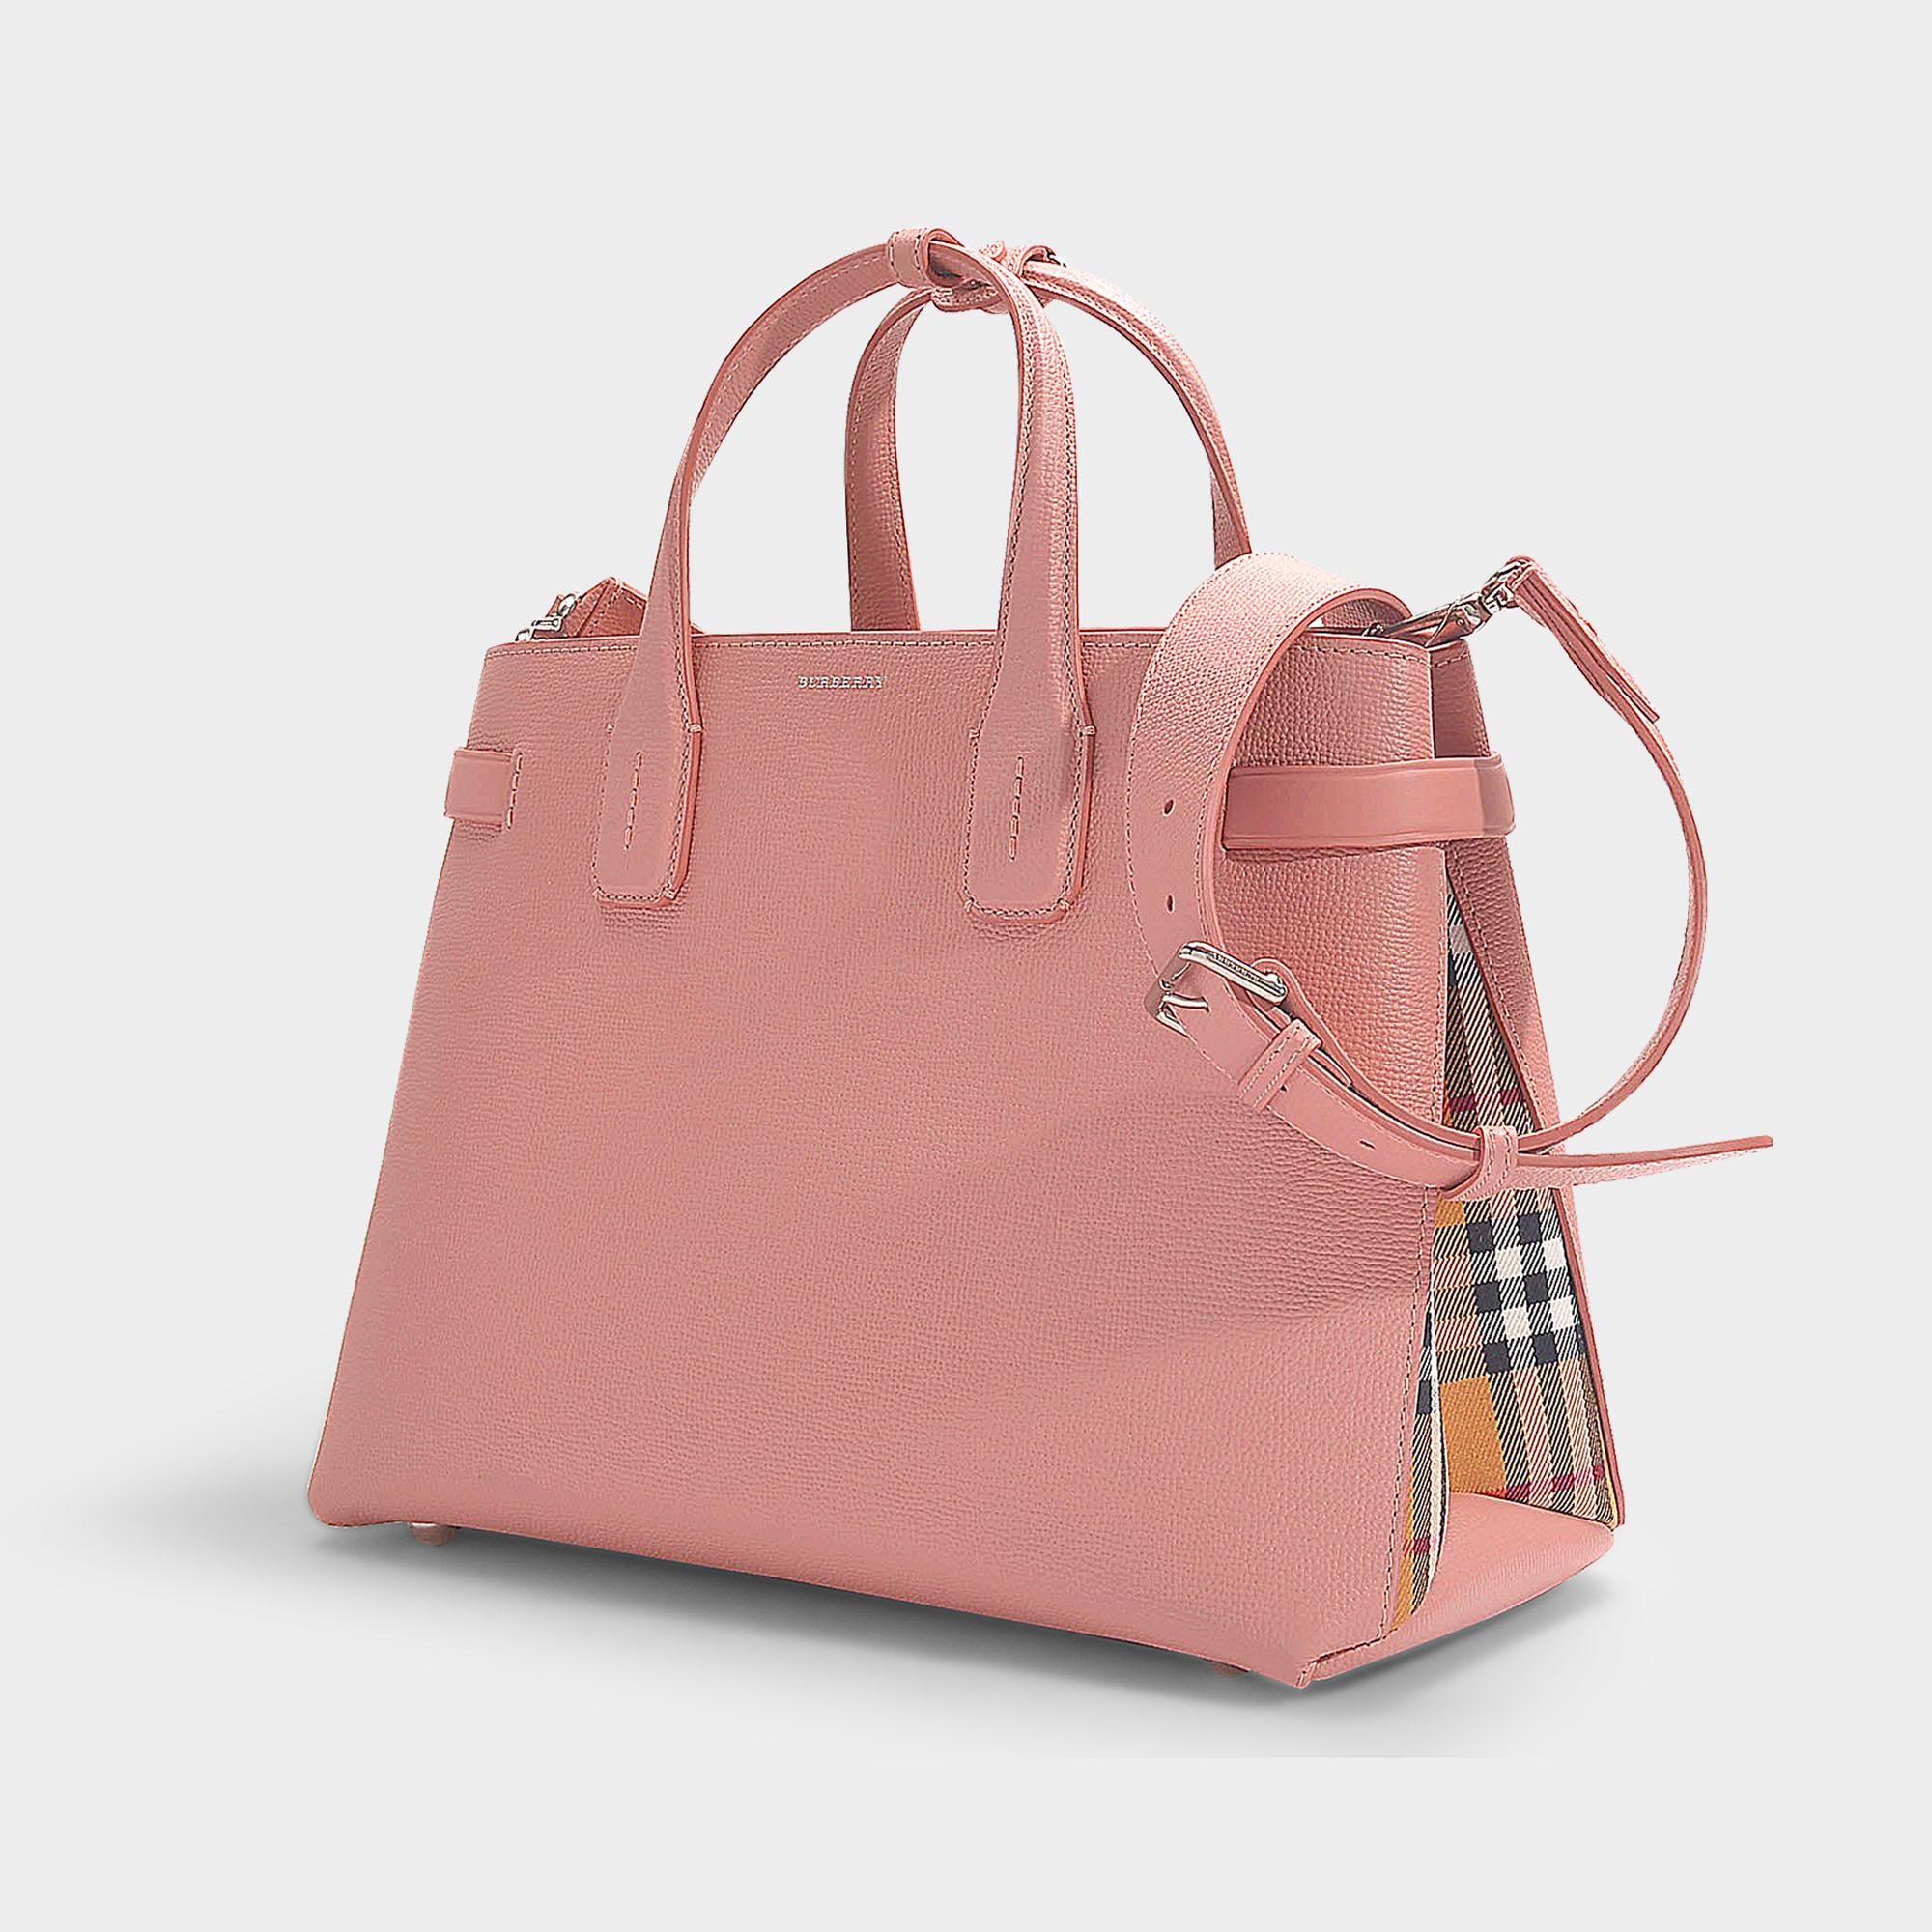 Burberry Leather The Banner Medium Tote In Ash Rose Calfskin in Pink | Lyst  UK